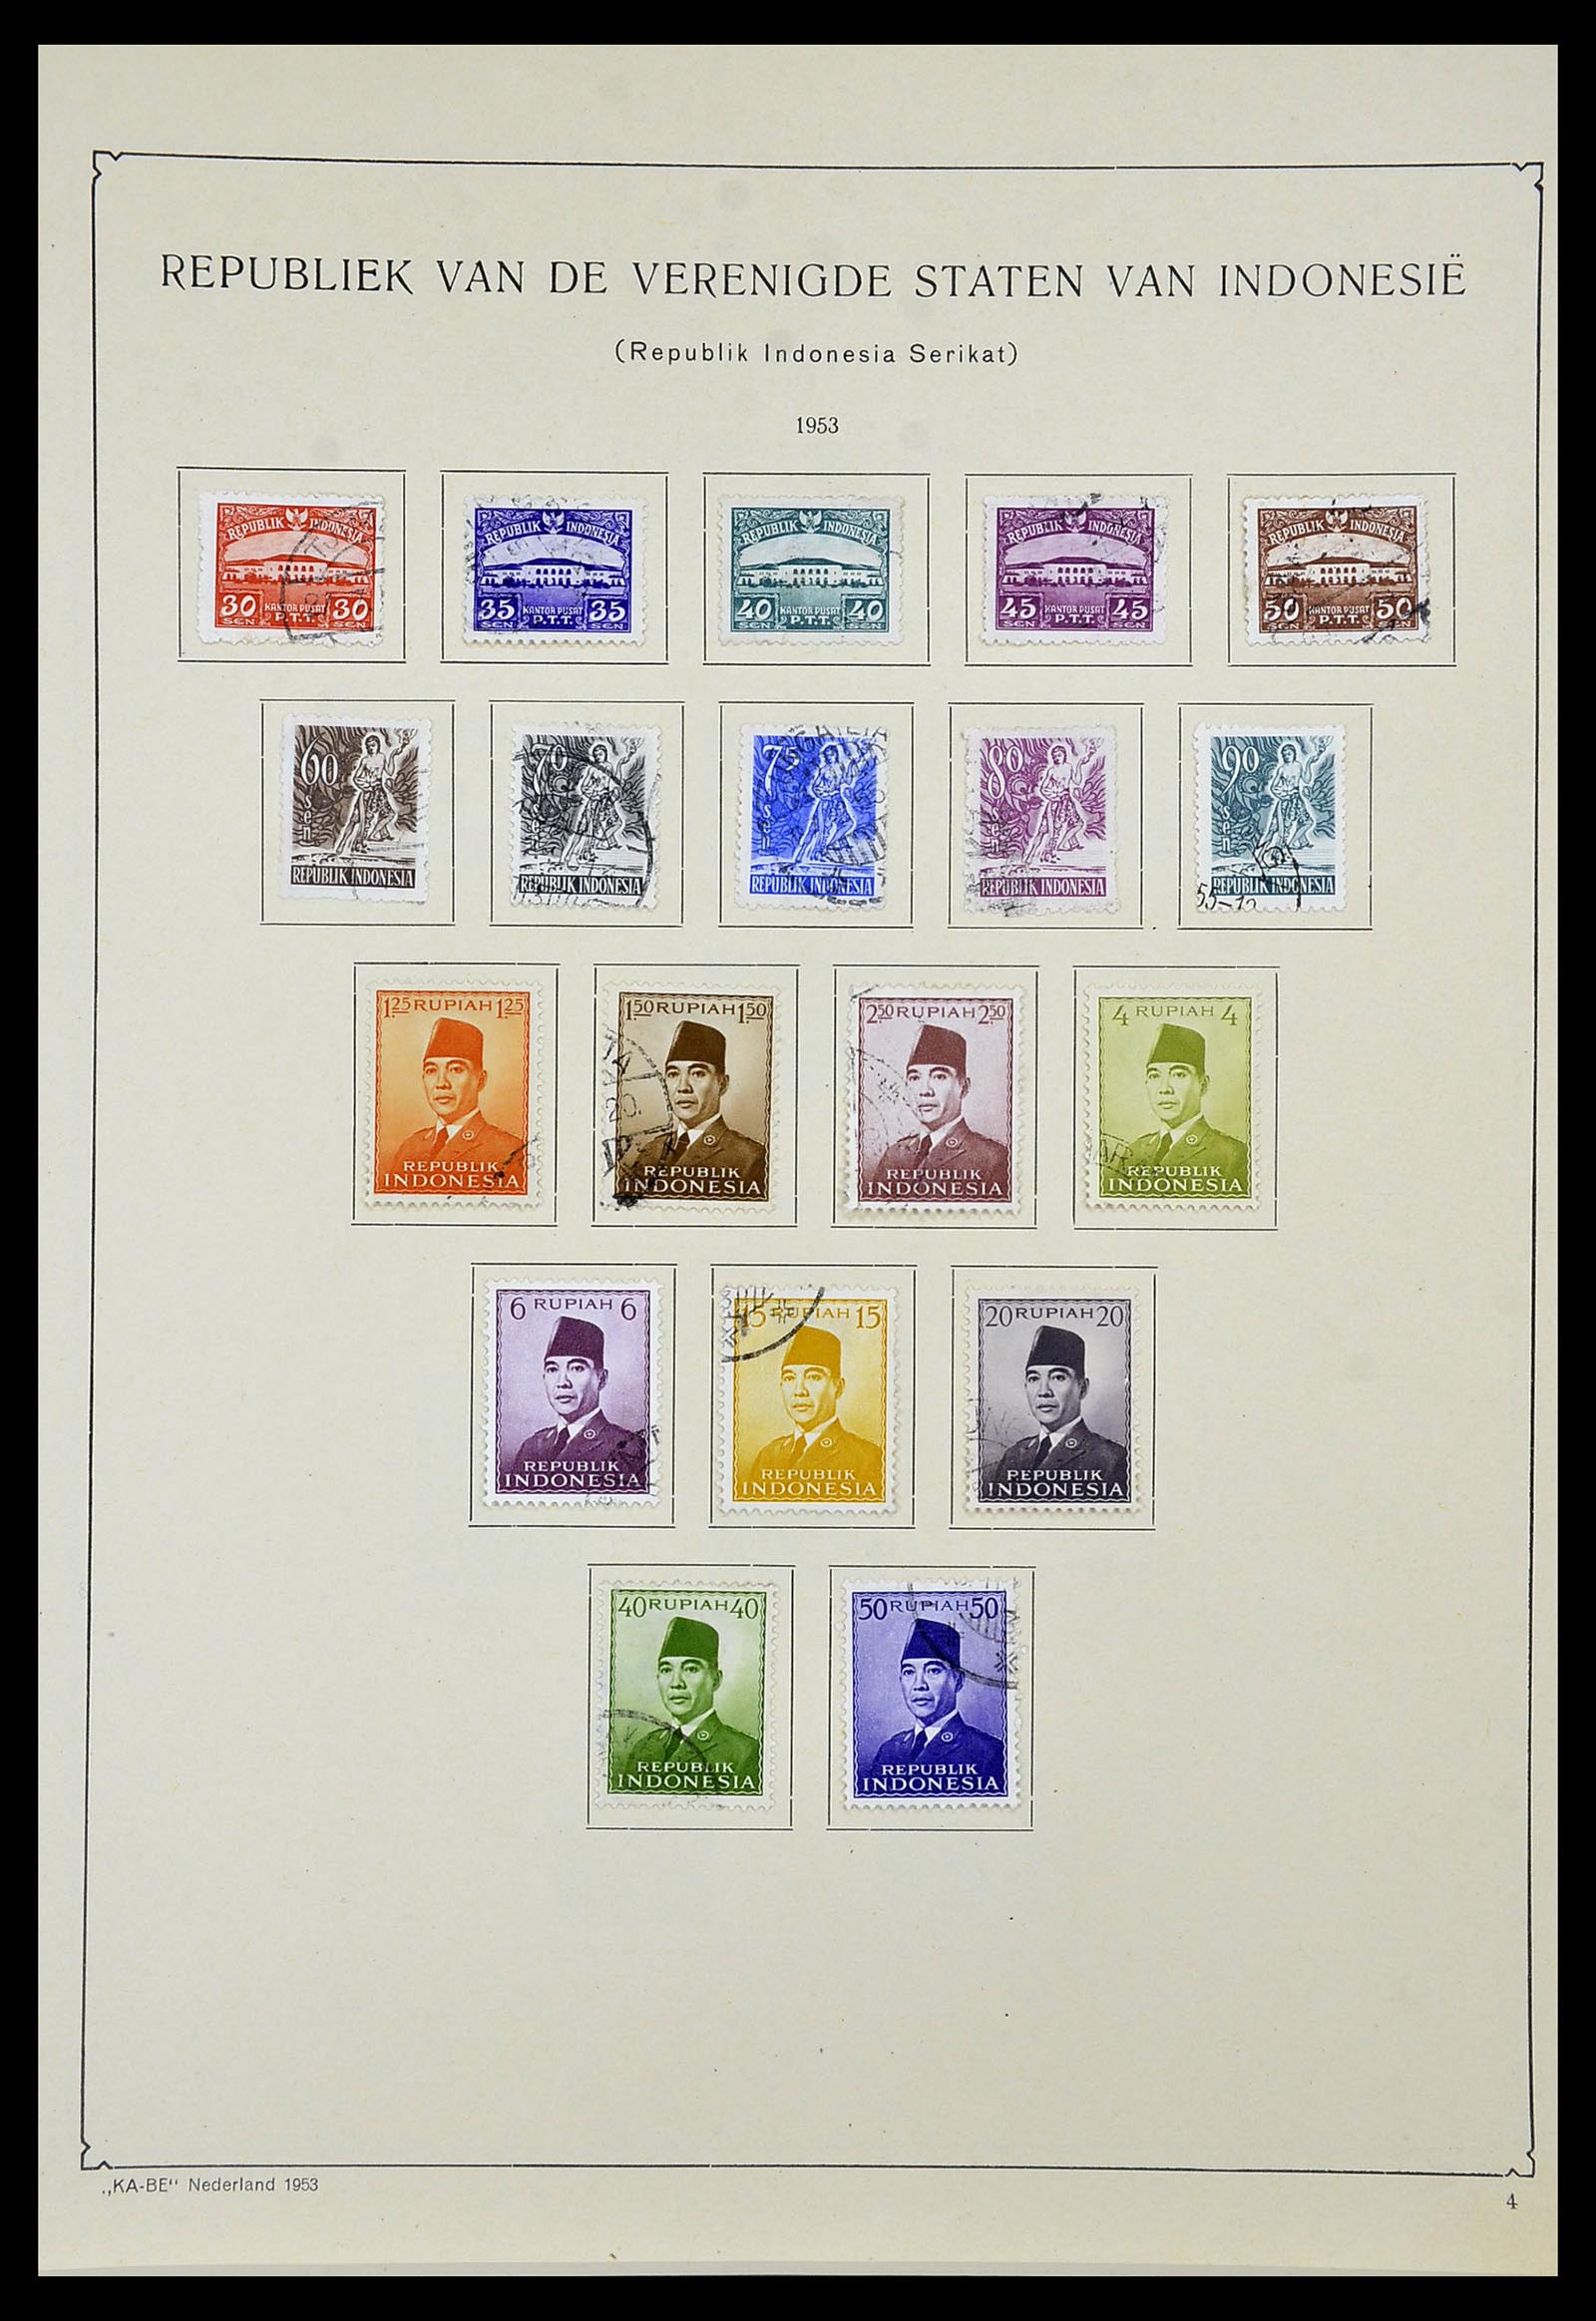 34592 077 - Stamp Collection 34592 Dutch east Indies and Indonesia 1864-1963.